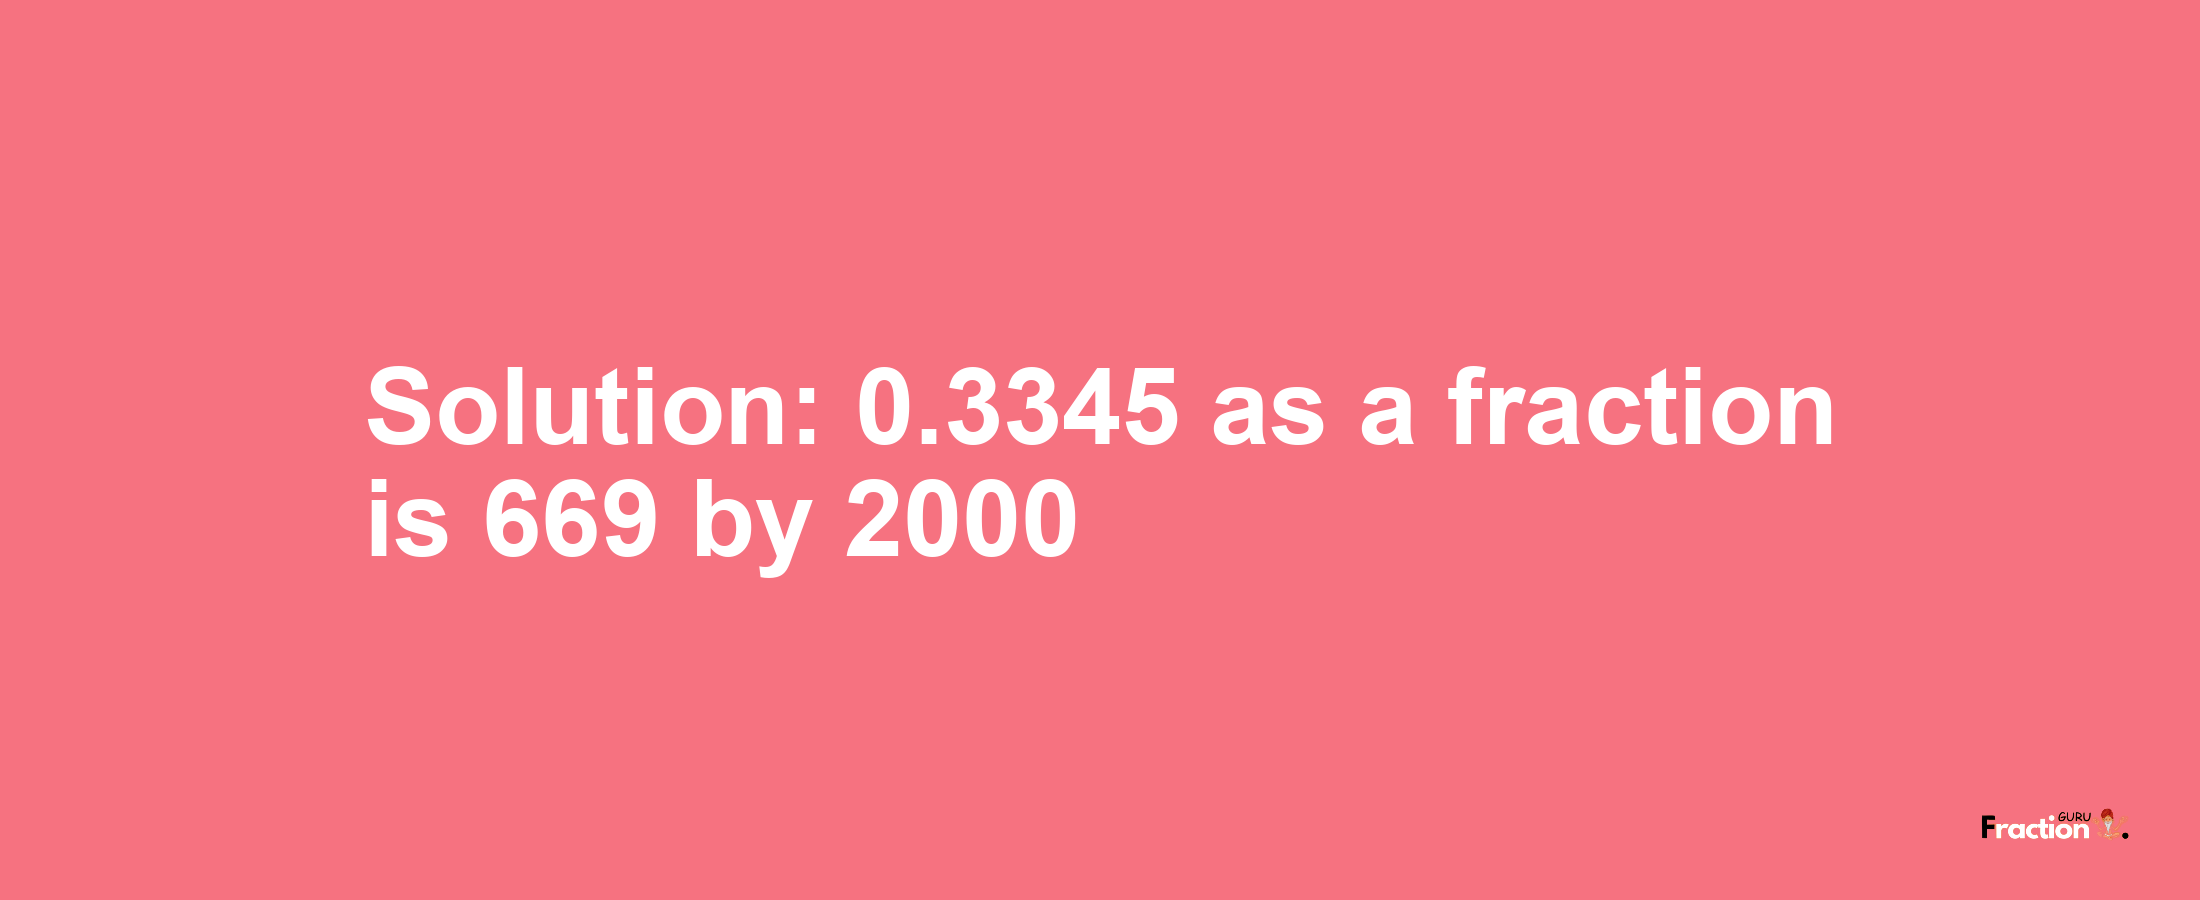 Solution:0.3345 as a fraction is 669/2000